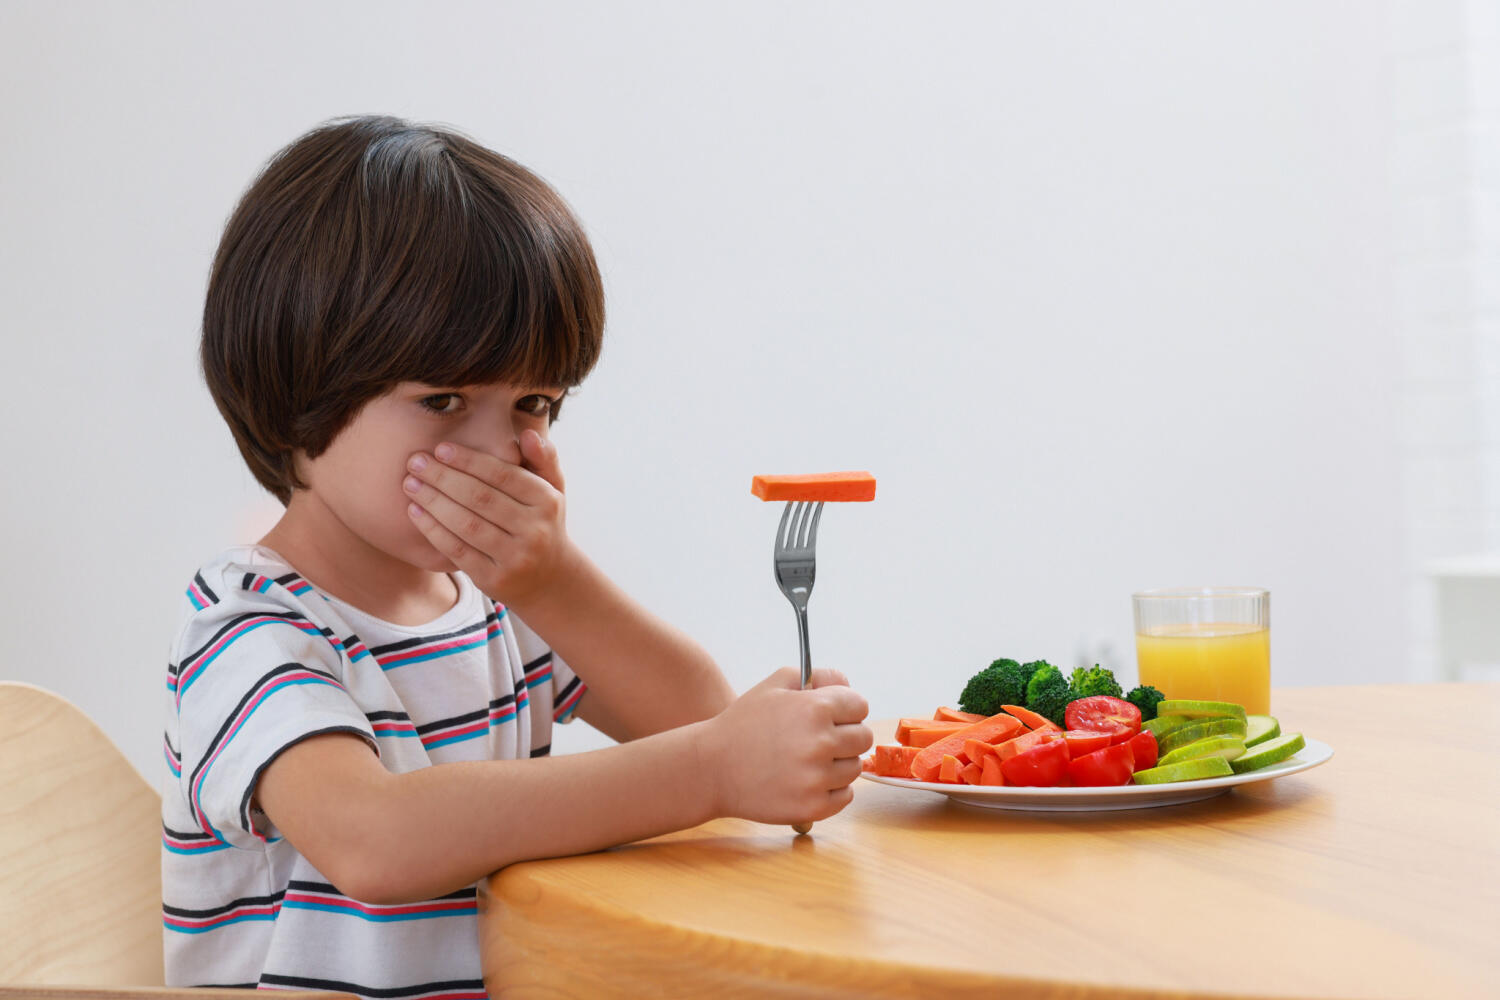 A kid refusing to eat vegetables